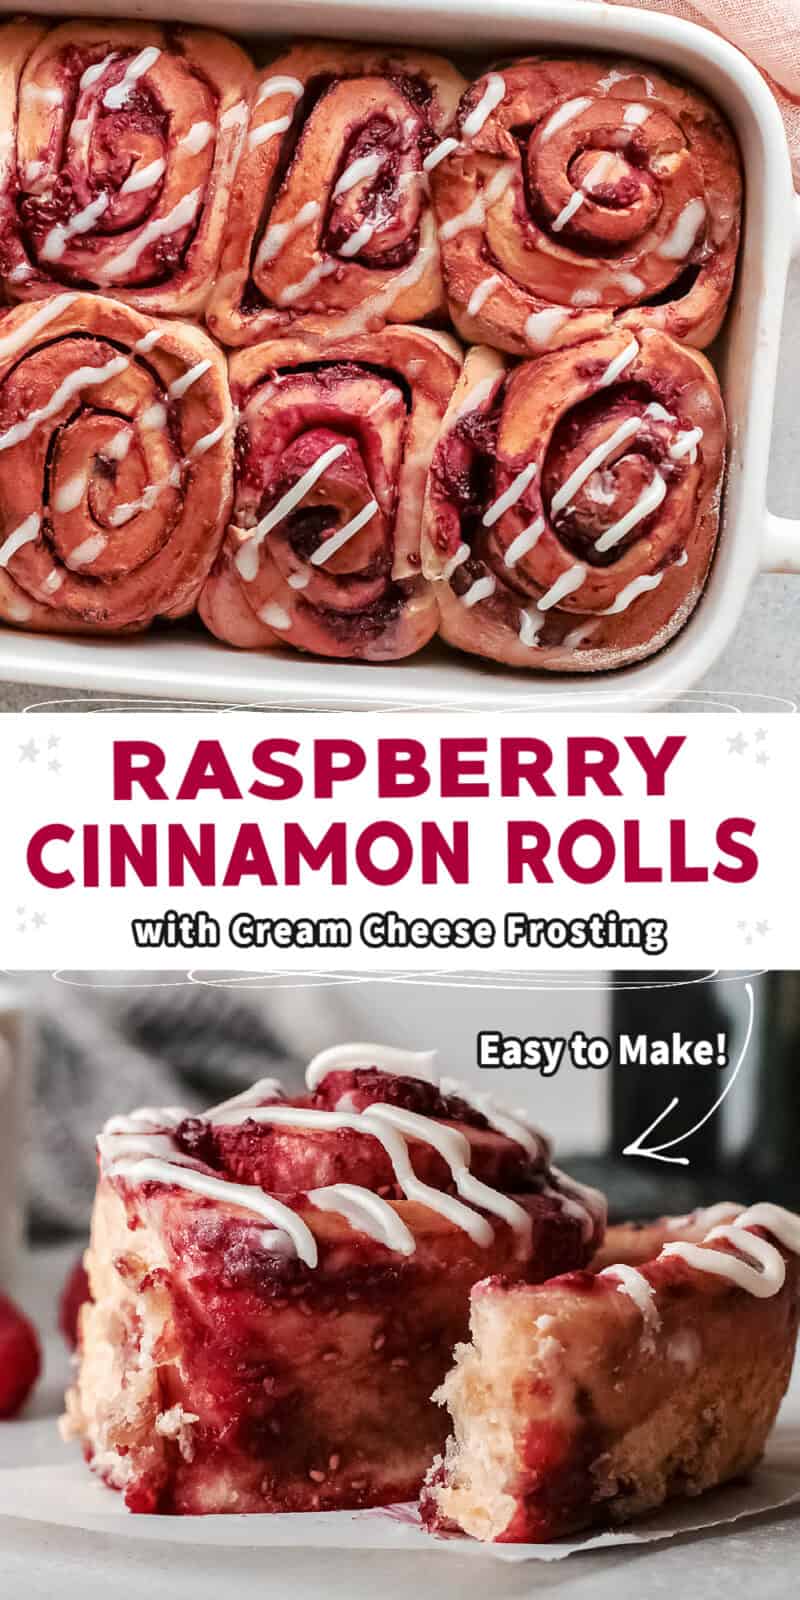 raspberry cinnamon rolls with cream cheese frosting with text